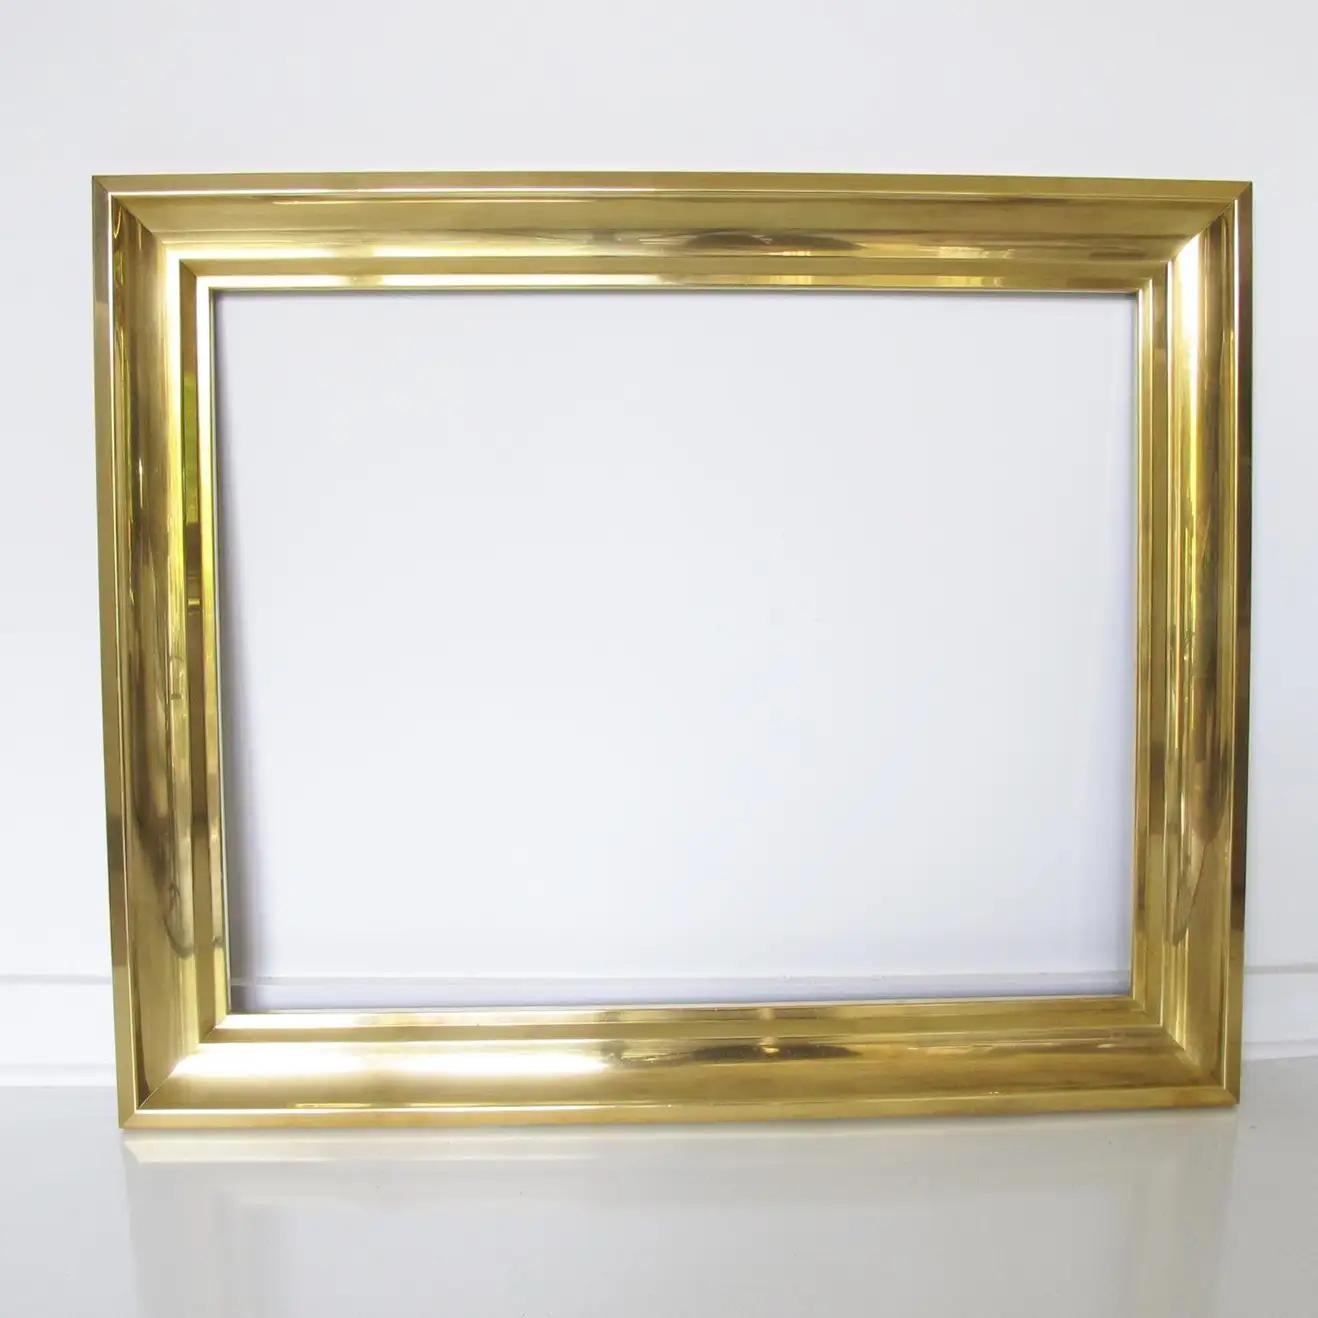 This French frame in polished brass dates from the 1940s. It will be perfect to include a painting, a drawing, a lithograph, a mirror, or any other DIY decoration. Its rectangular shape can be hung in portrait or landscape positions. The frame is